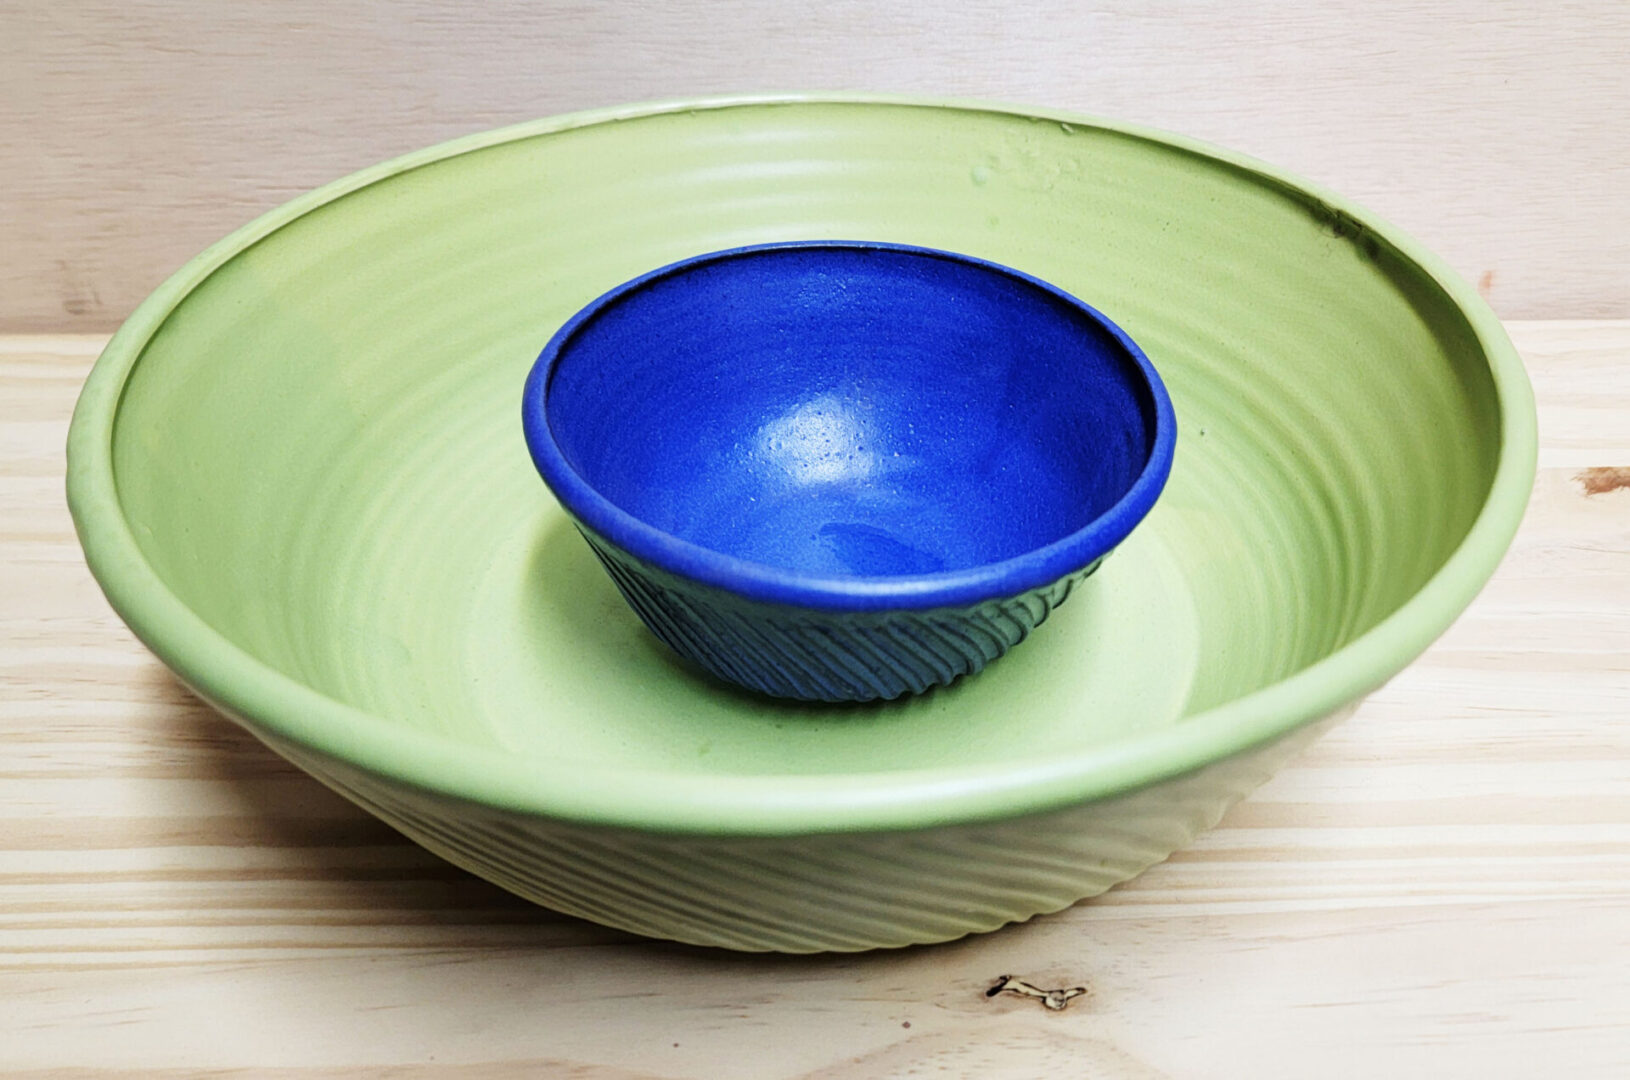 A blue bowl sitting in the middle of two green bowls.